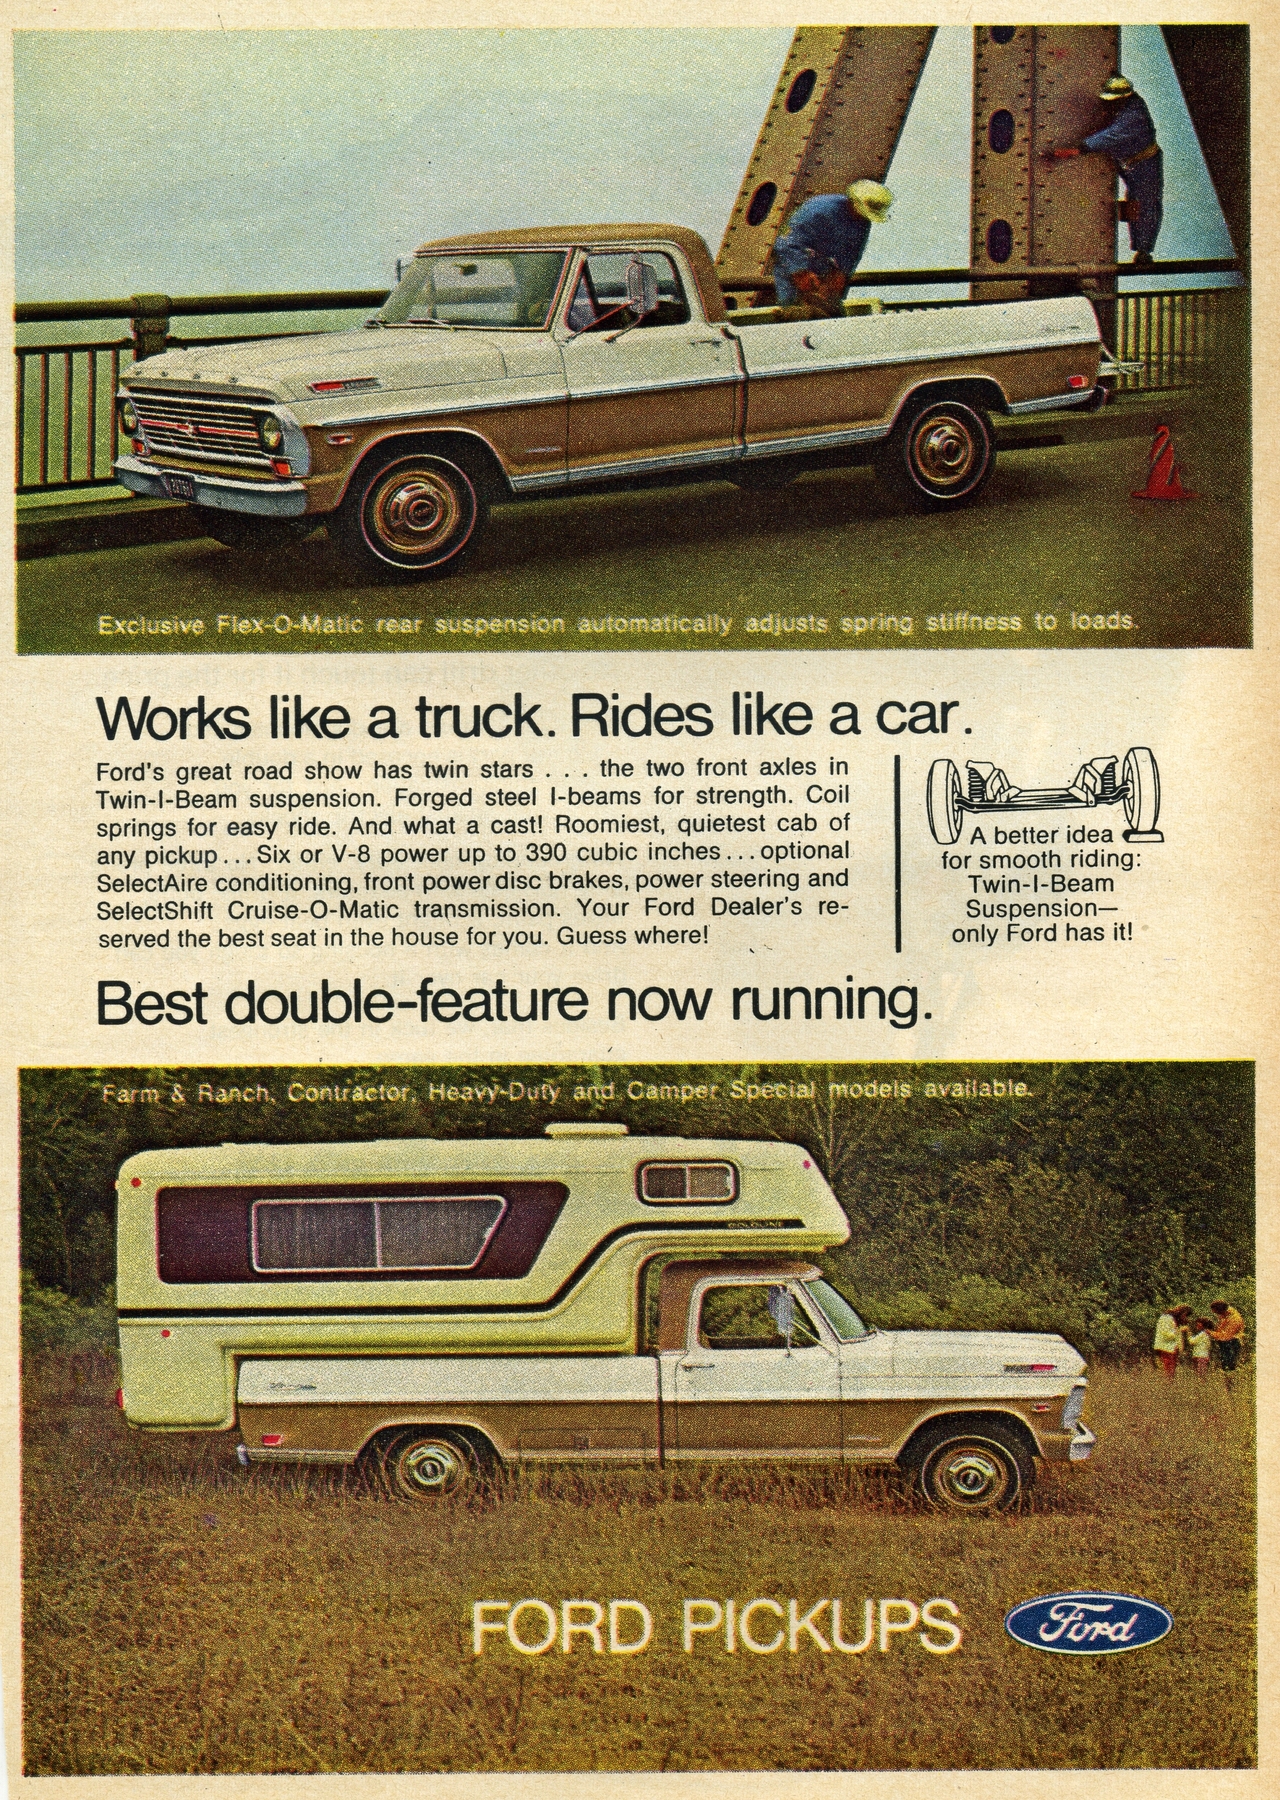 Old Ford truck advertisement